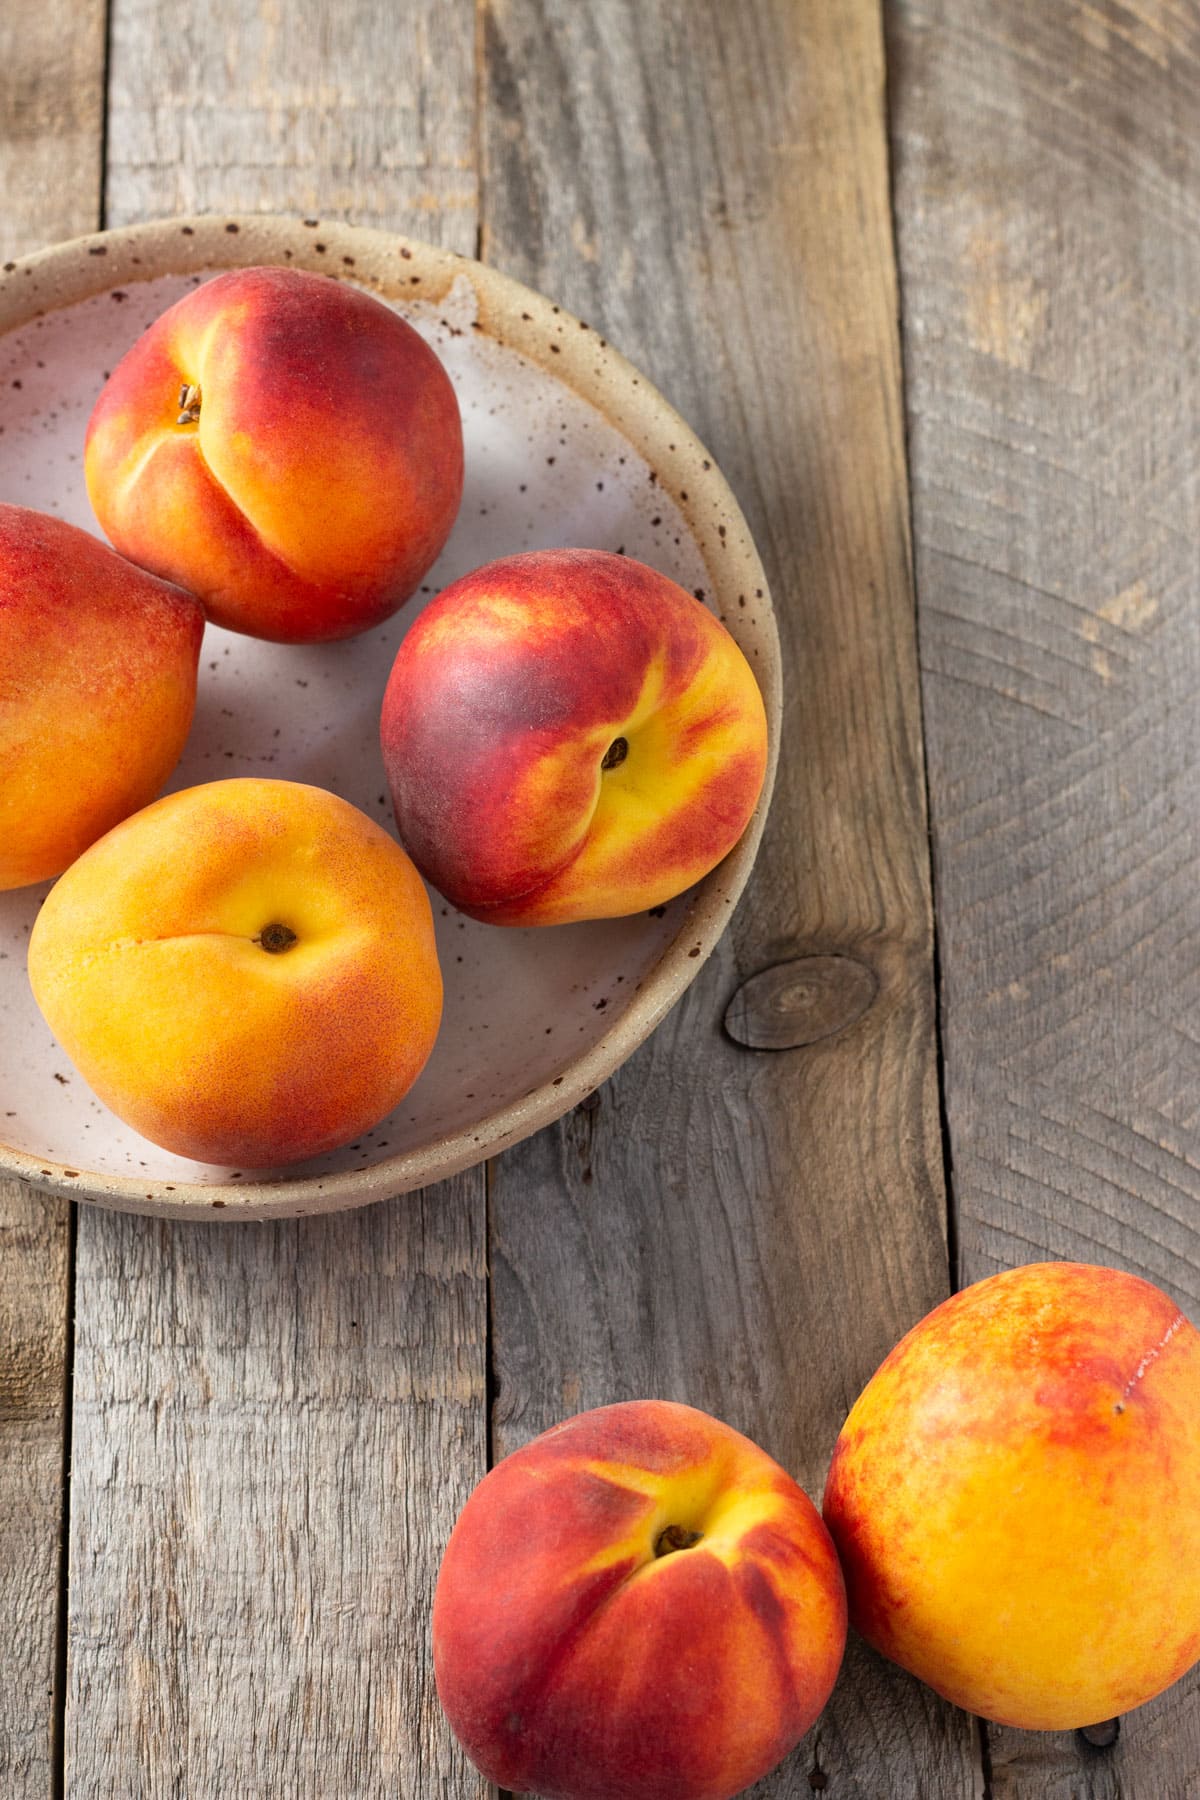 Group of fresh peaches on a rustic wood surface.